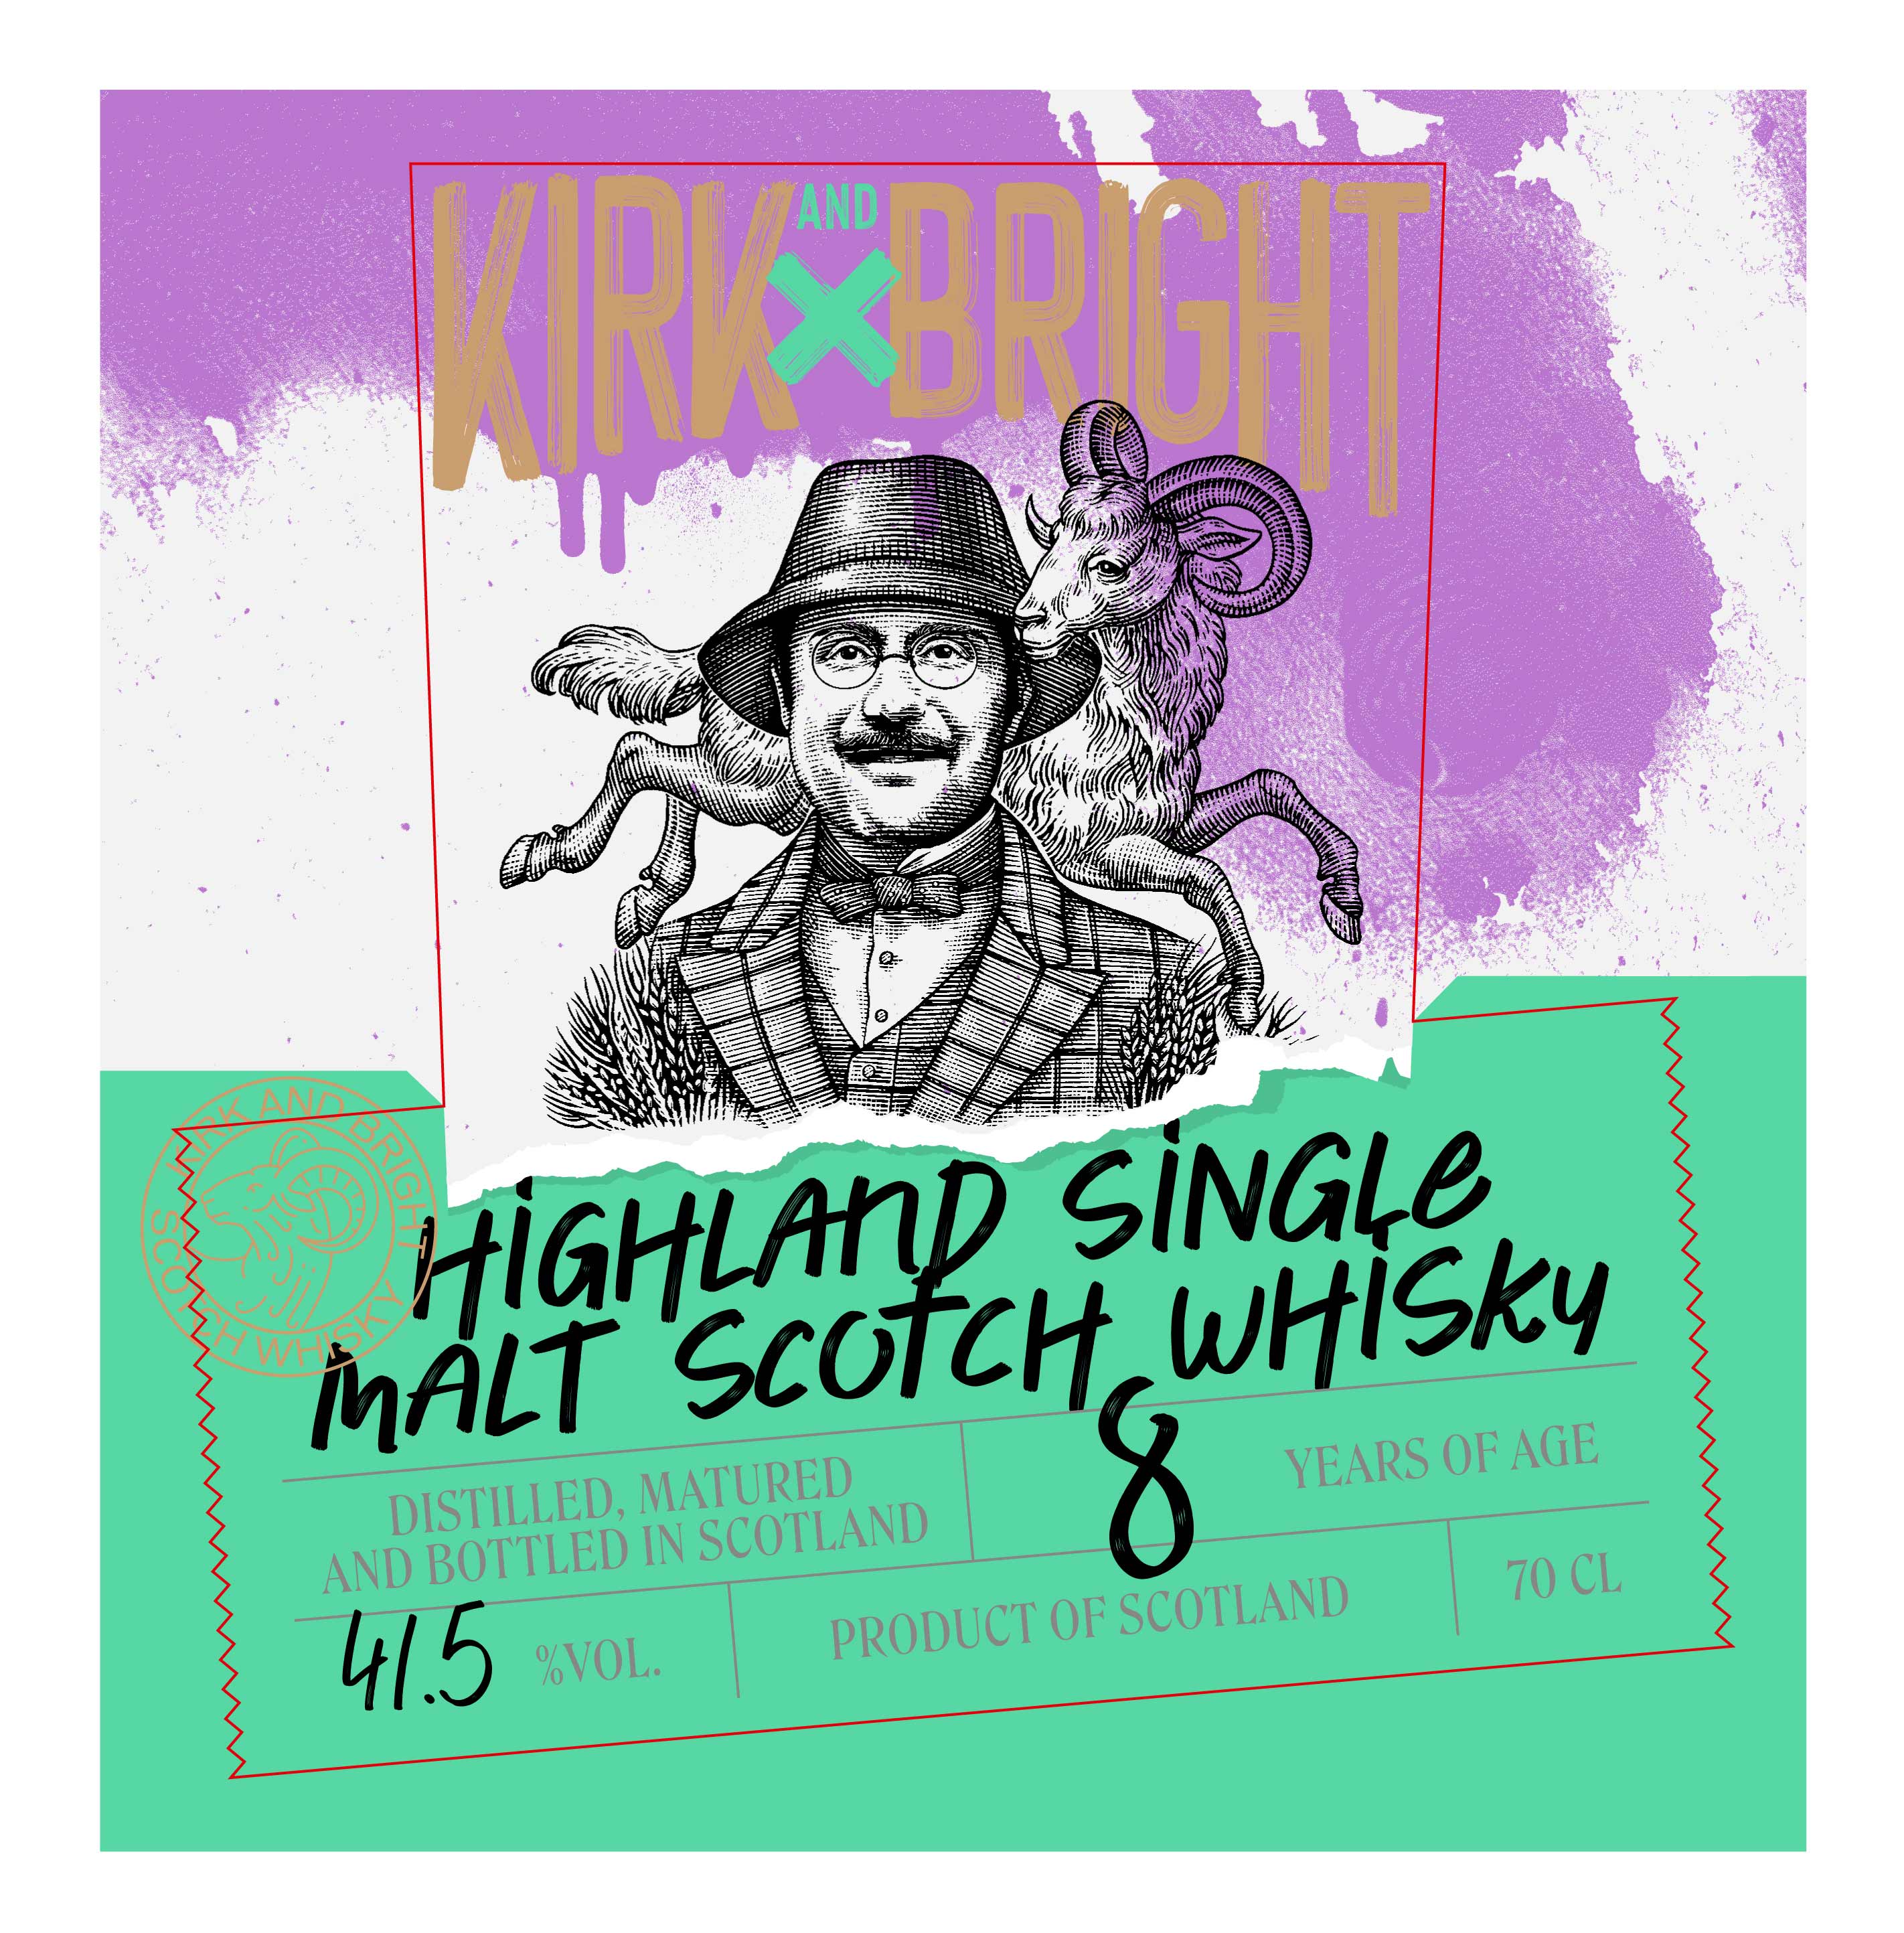 Kirk & Bright Whisky Label Illustrated by Steven Noble